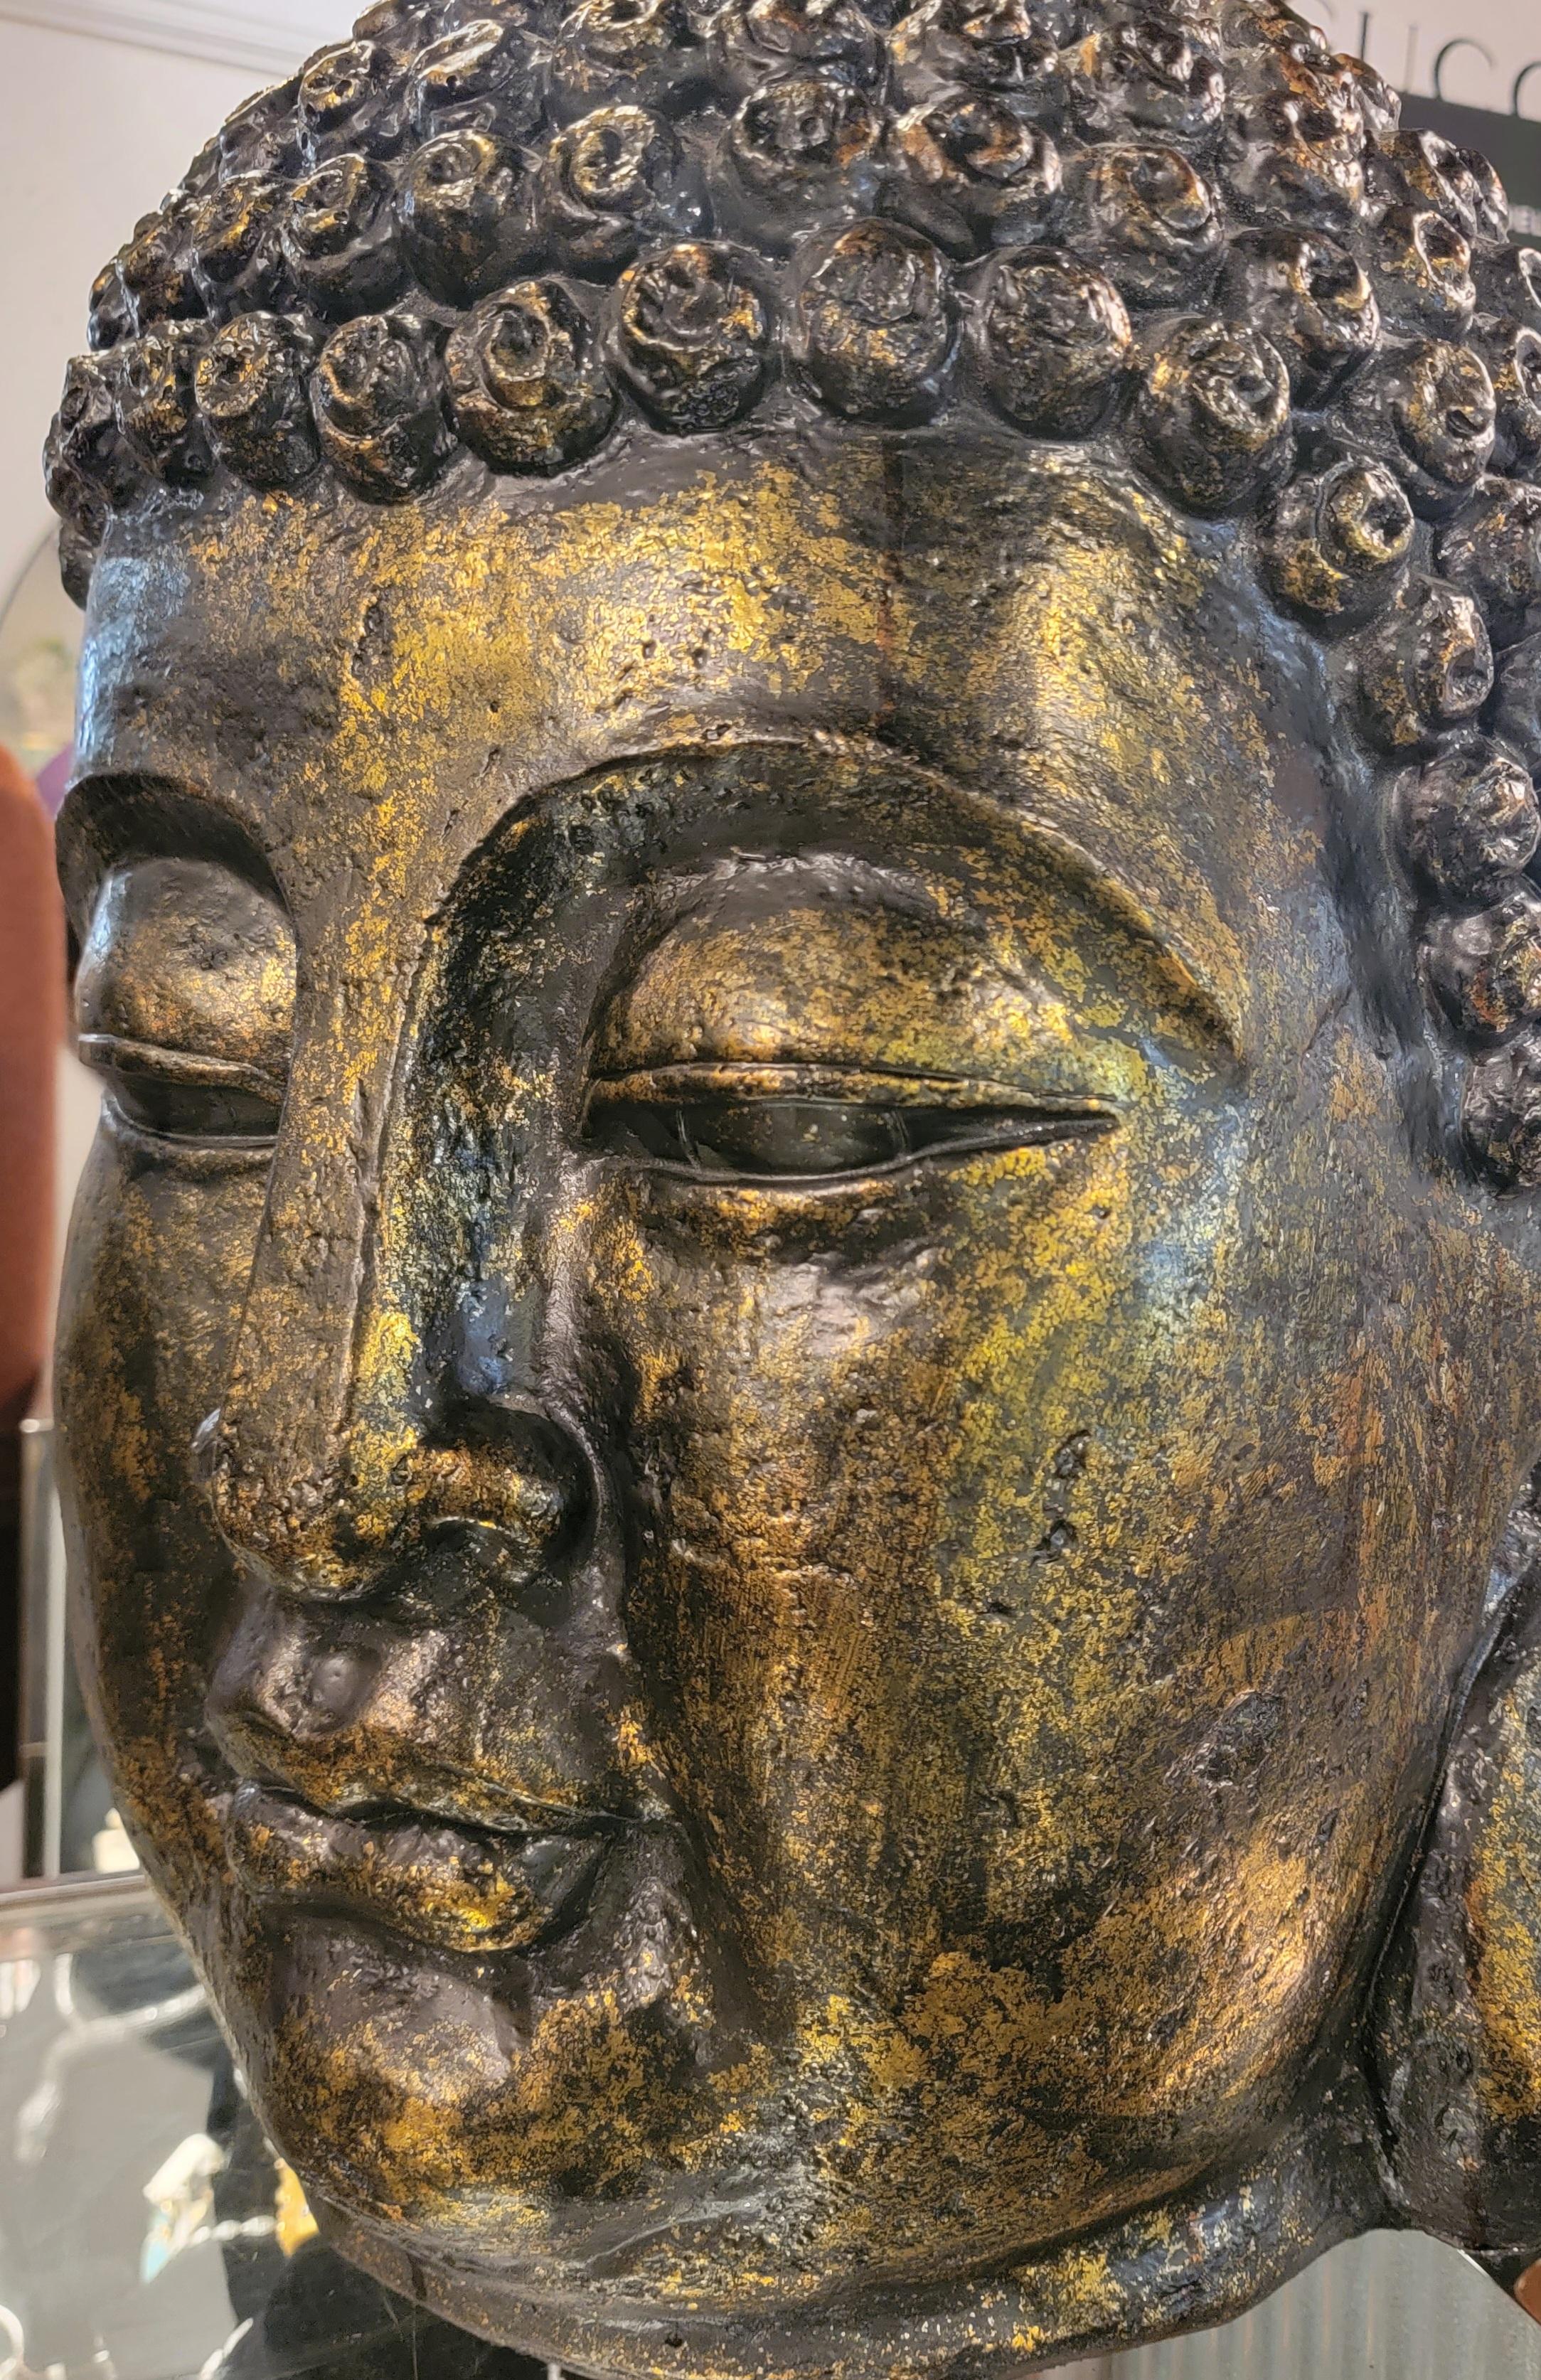 Large scale fiber glass buddha head with gold and black tones. Great pattern. This fiber glass buddha head is in great shape and has little to no wear.